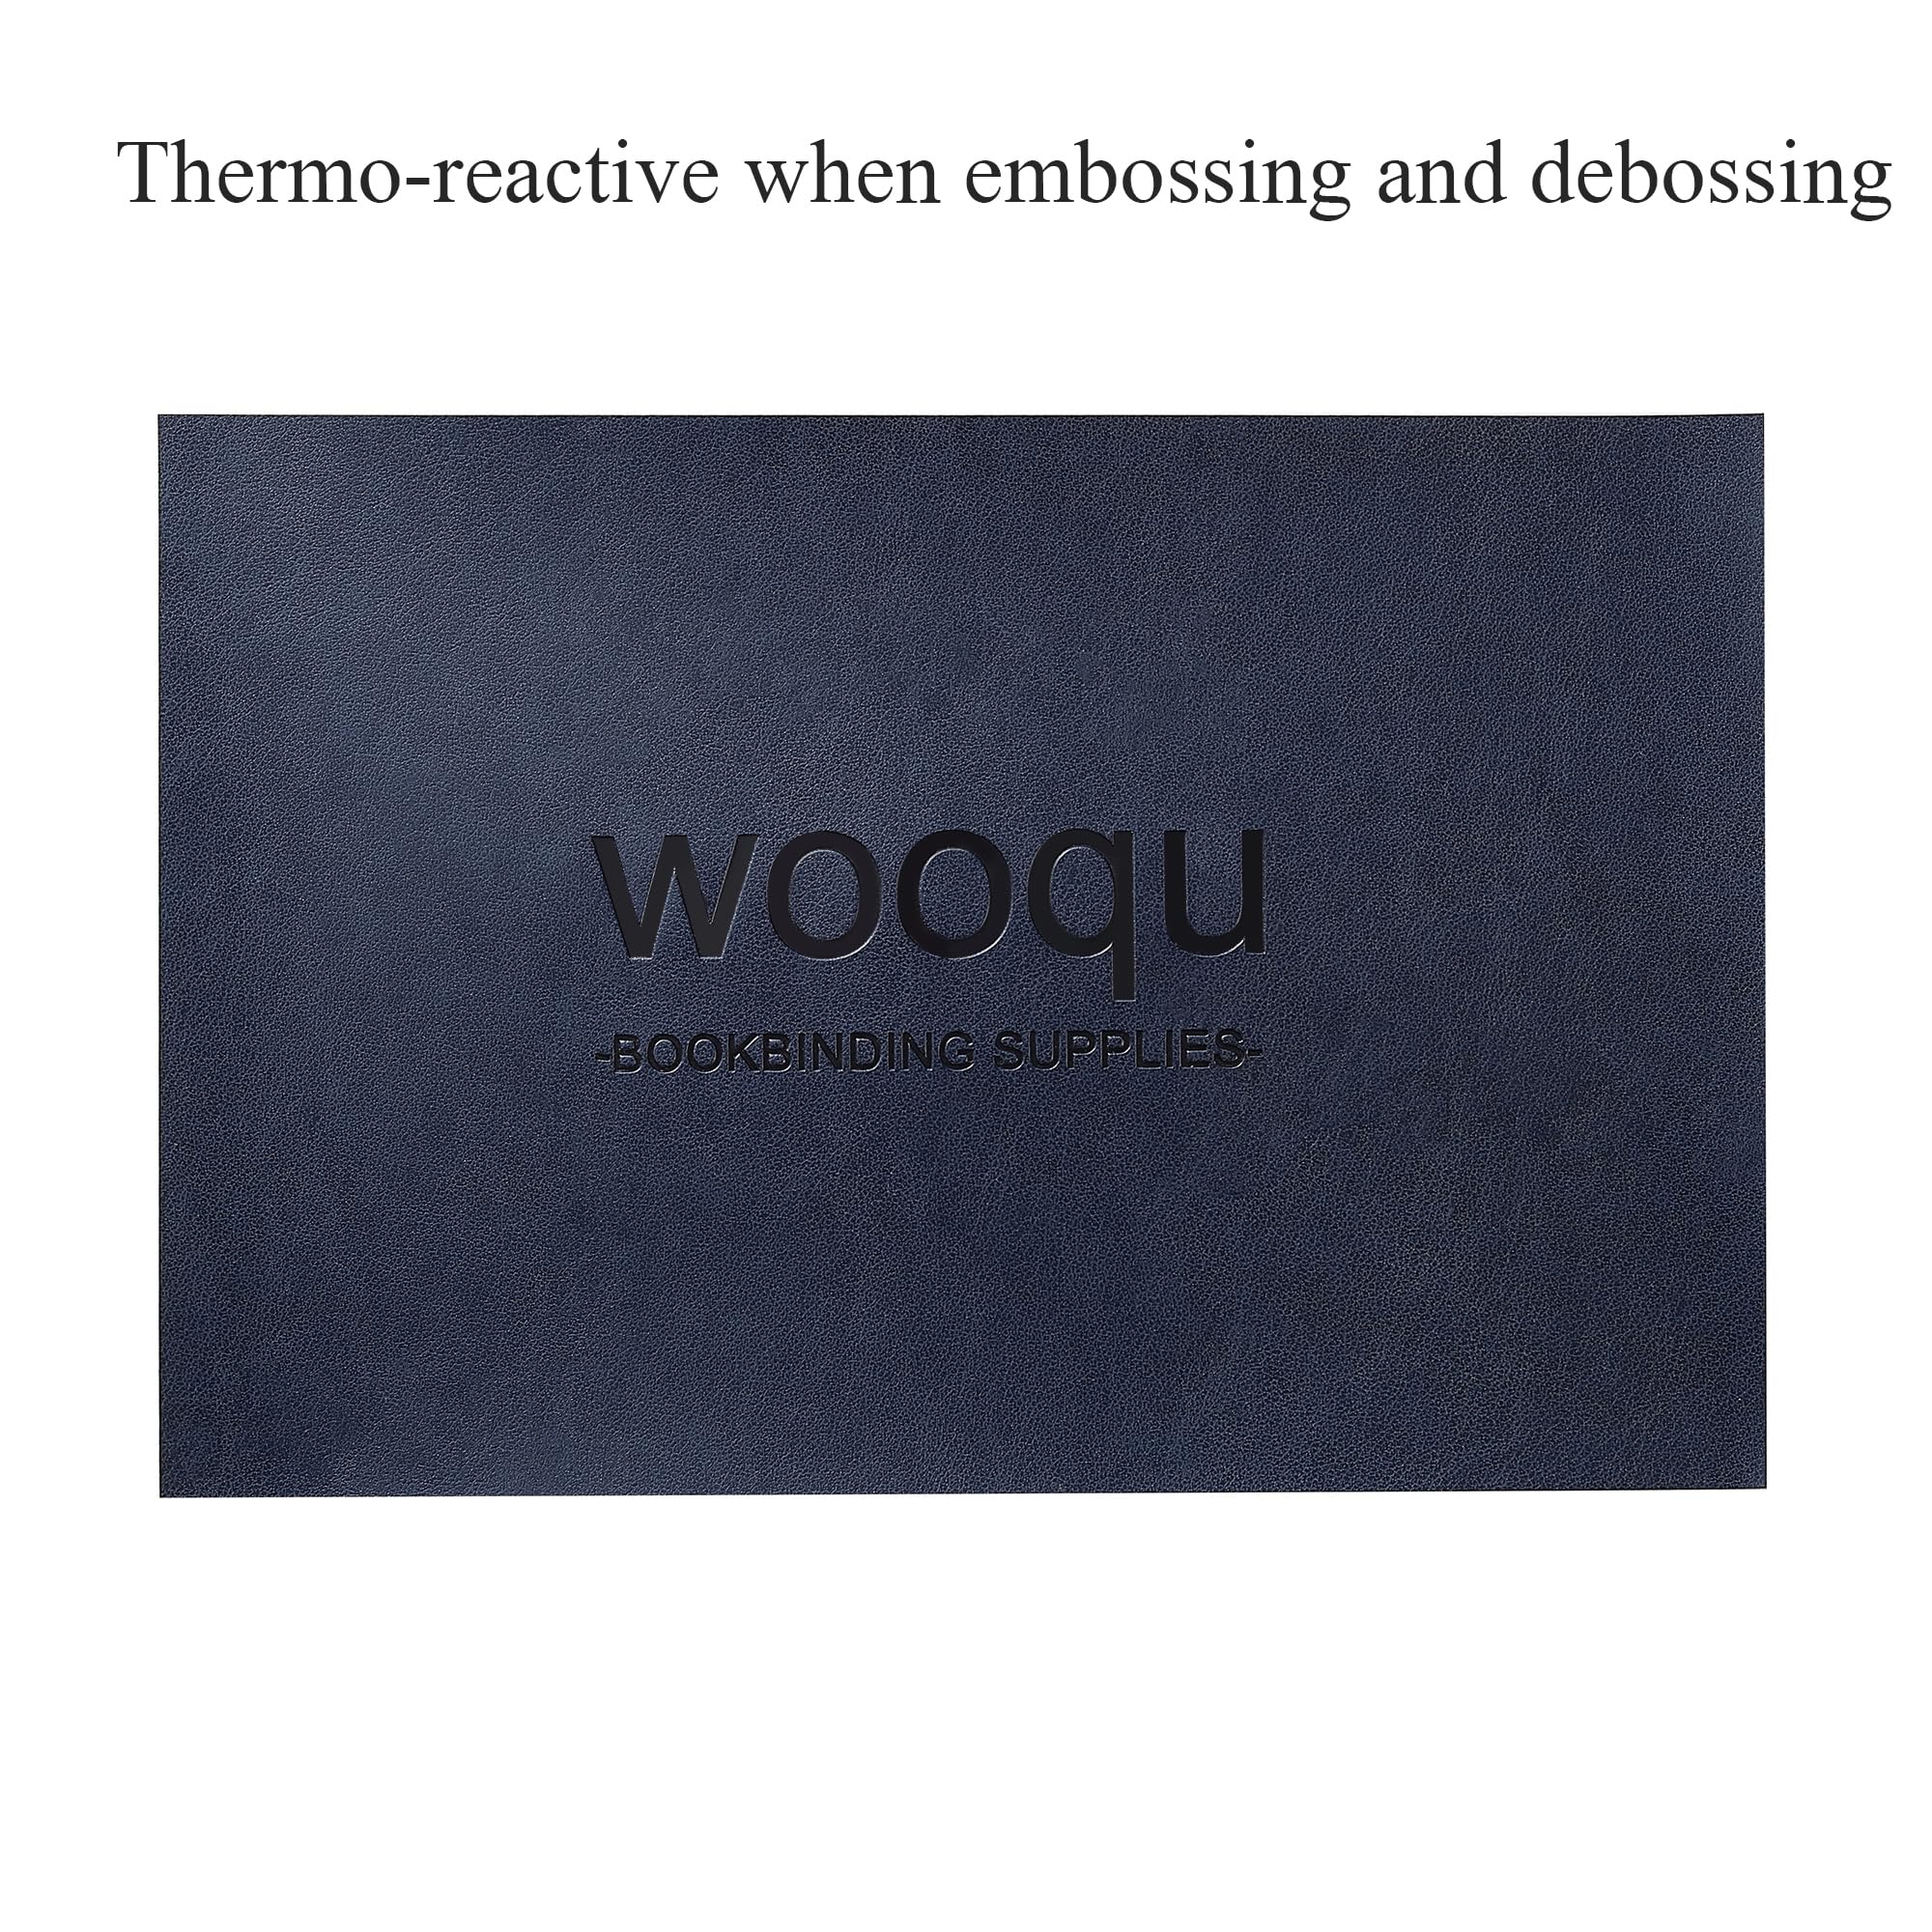 Wooqu PU Leather Book Cloth, Polyurethane Coated and Non-Woven Base, Leather-Like Look, Soft, 17x29”, for Book Binding, Goat Grain, Navy Blue